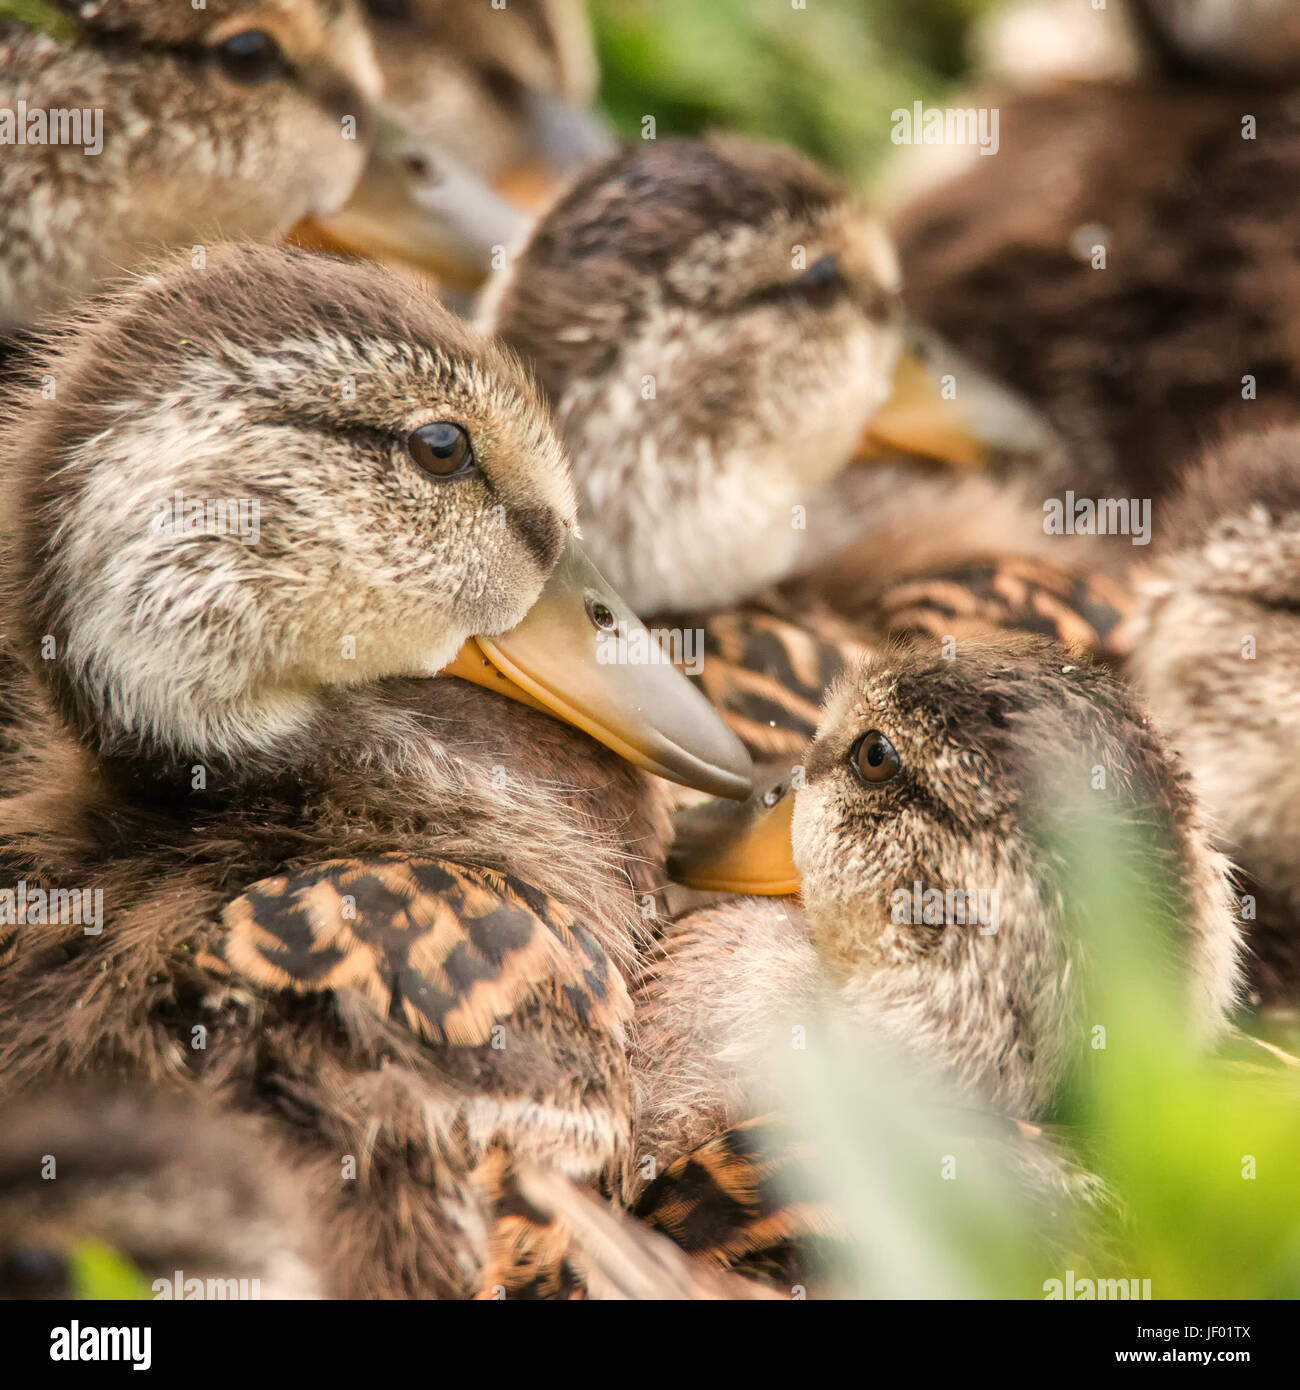 Several Ducklings Huddled Together Stock Photo